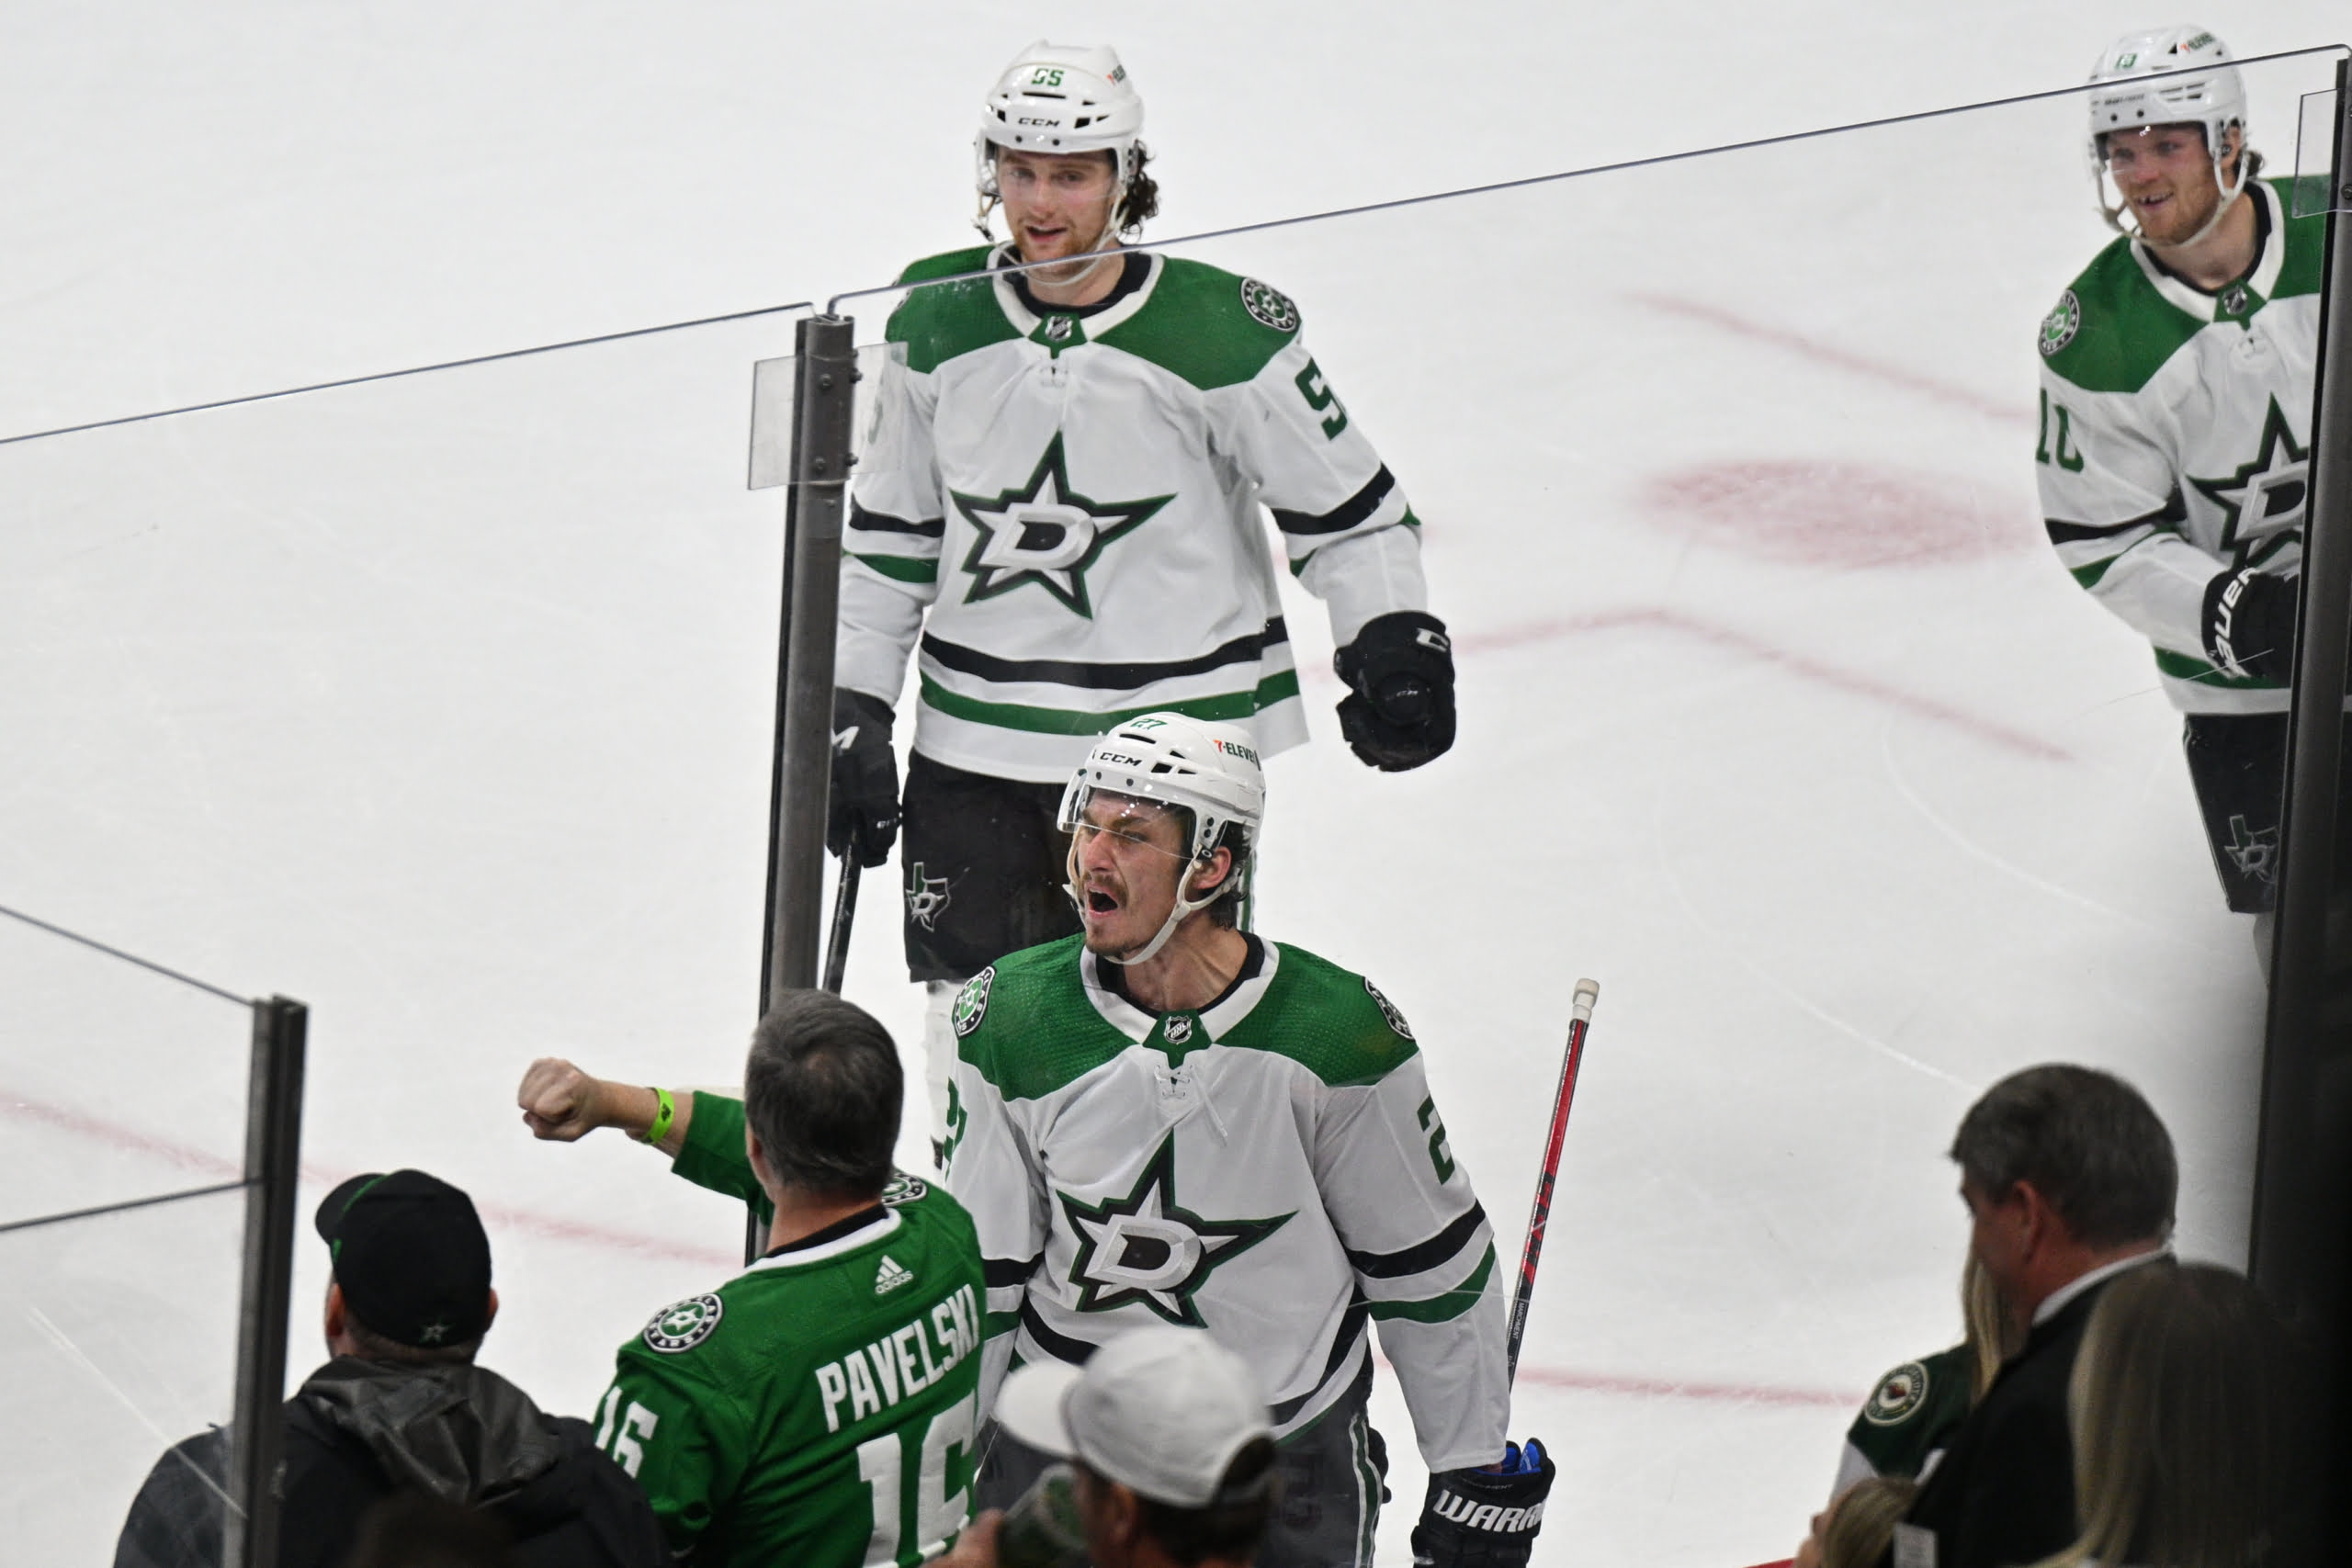 Kraken-Stars: NHL playoff preview, predictions, stats, notes